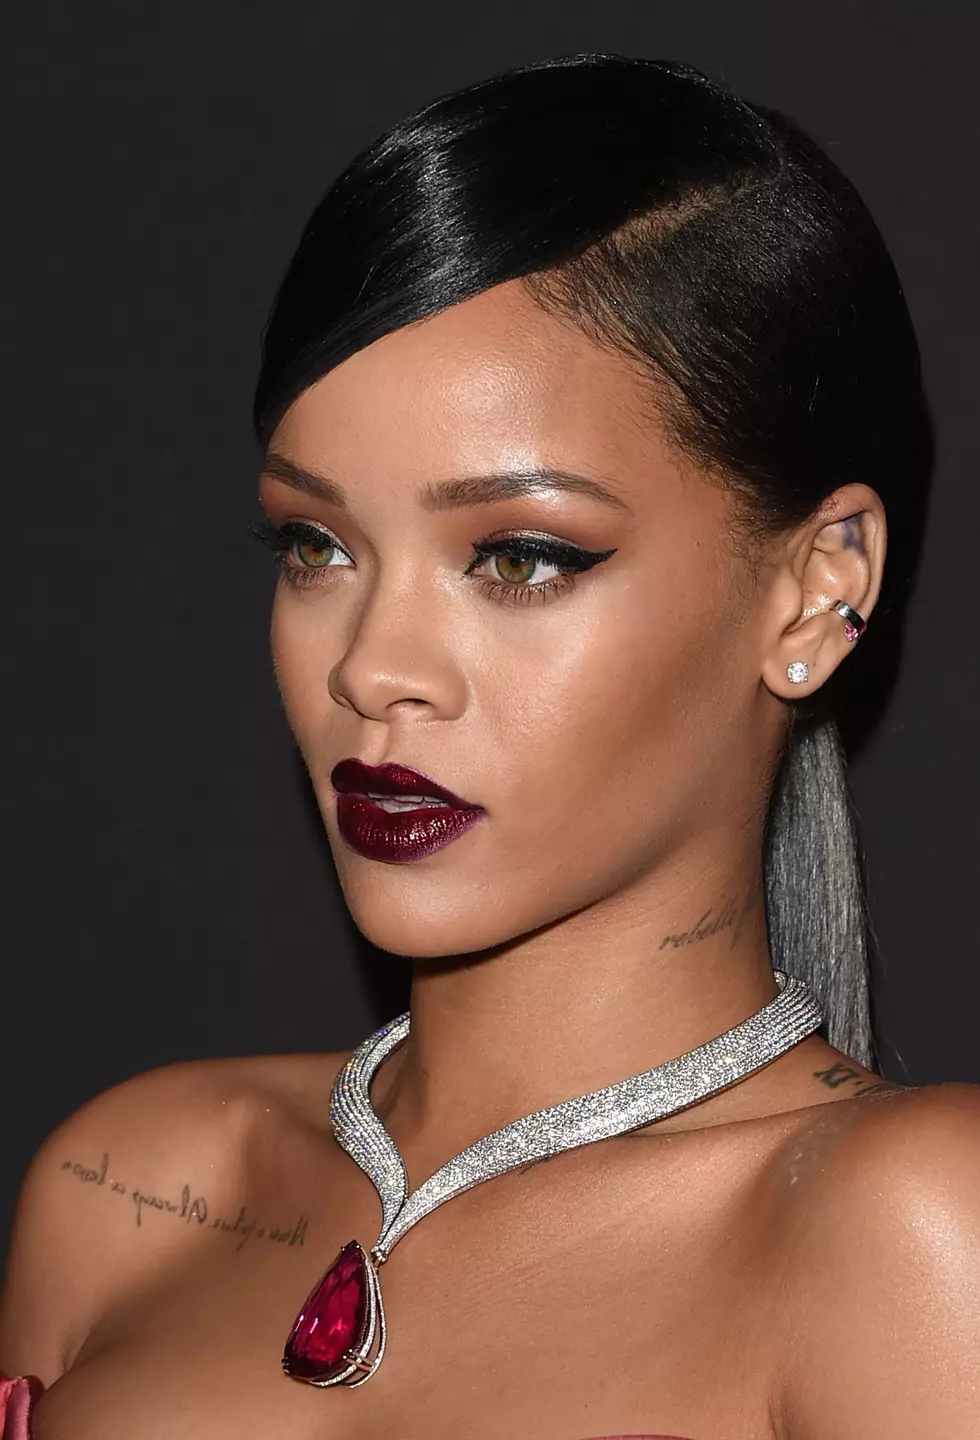 Buffalo’s Dopest Tattoos – Share Yours to Win Tickets to See Rihanna